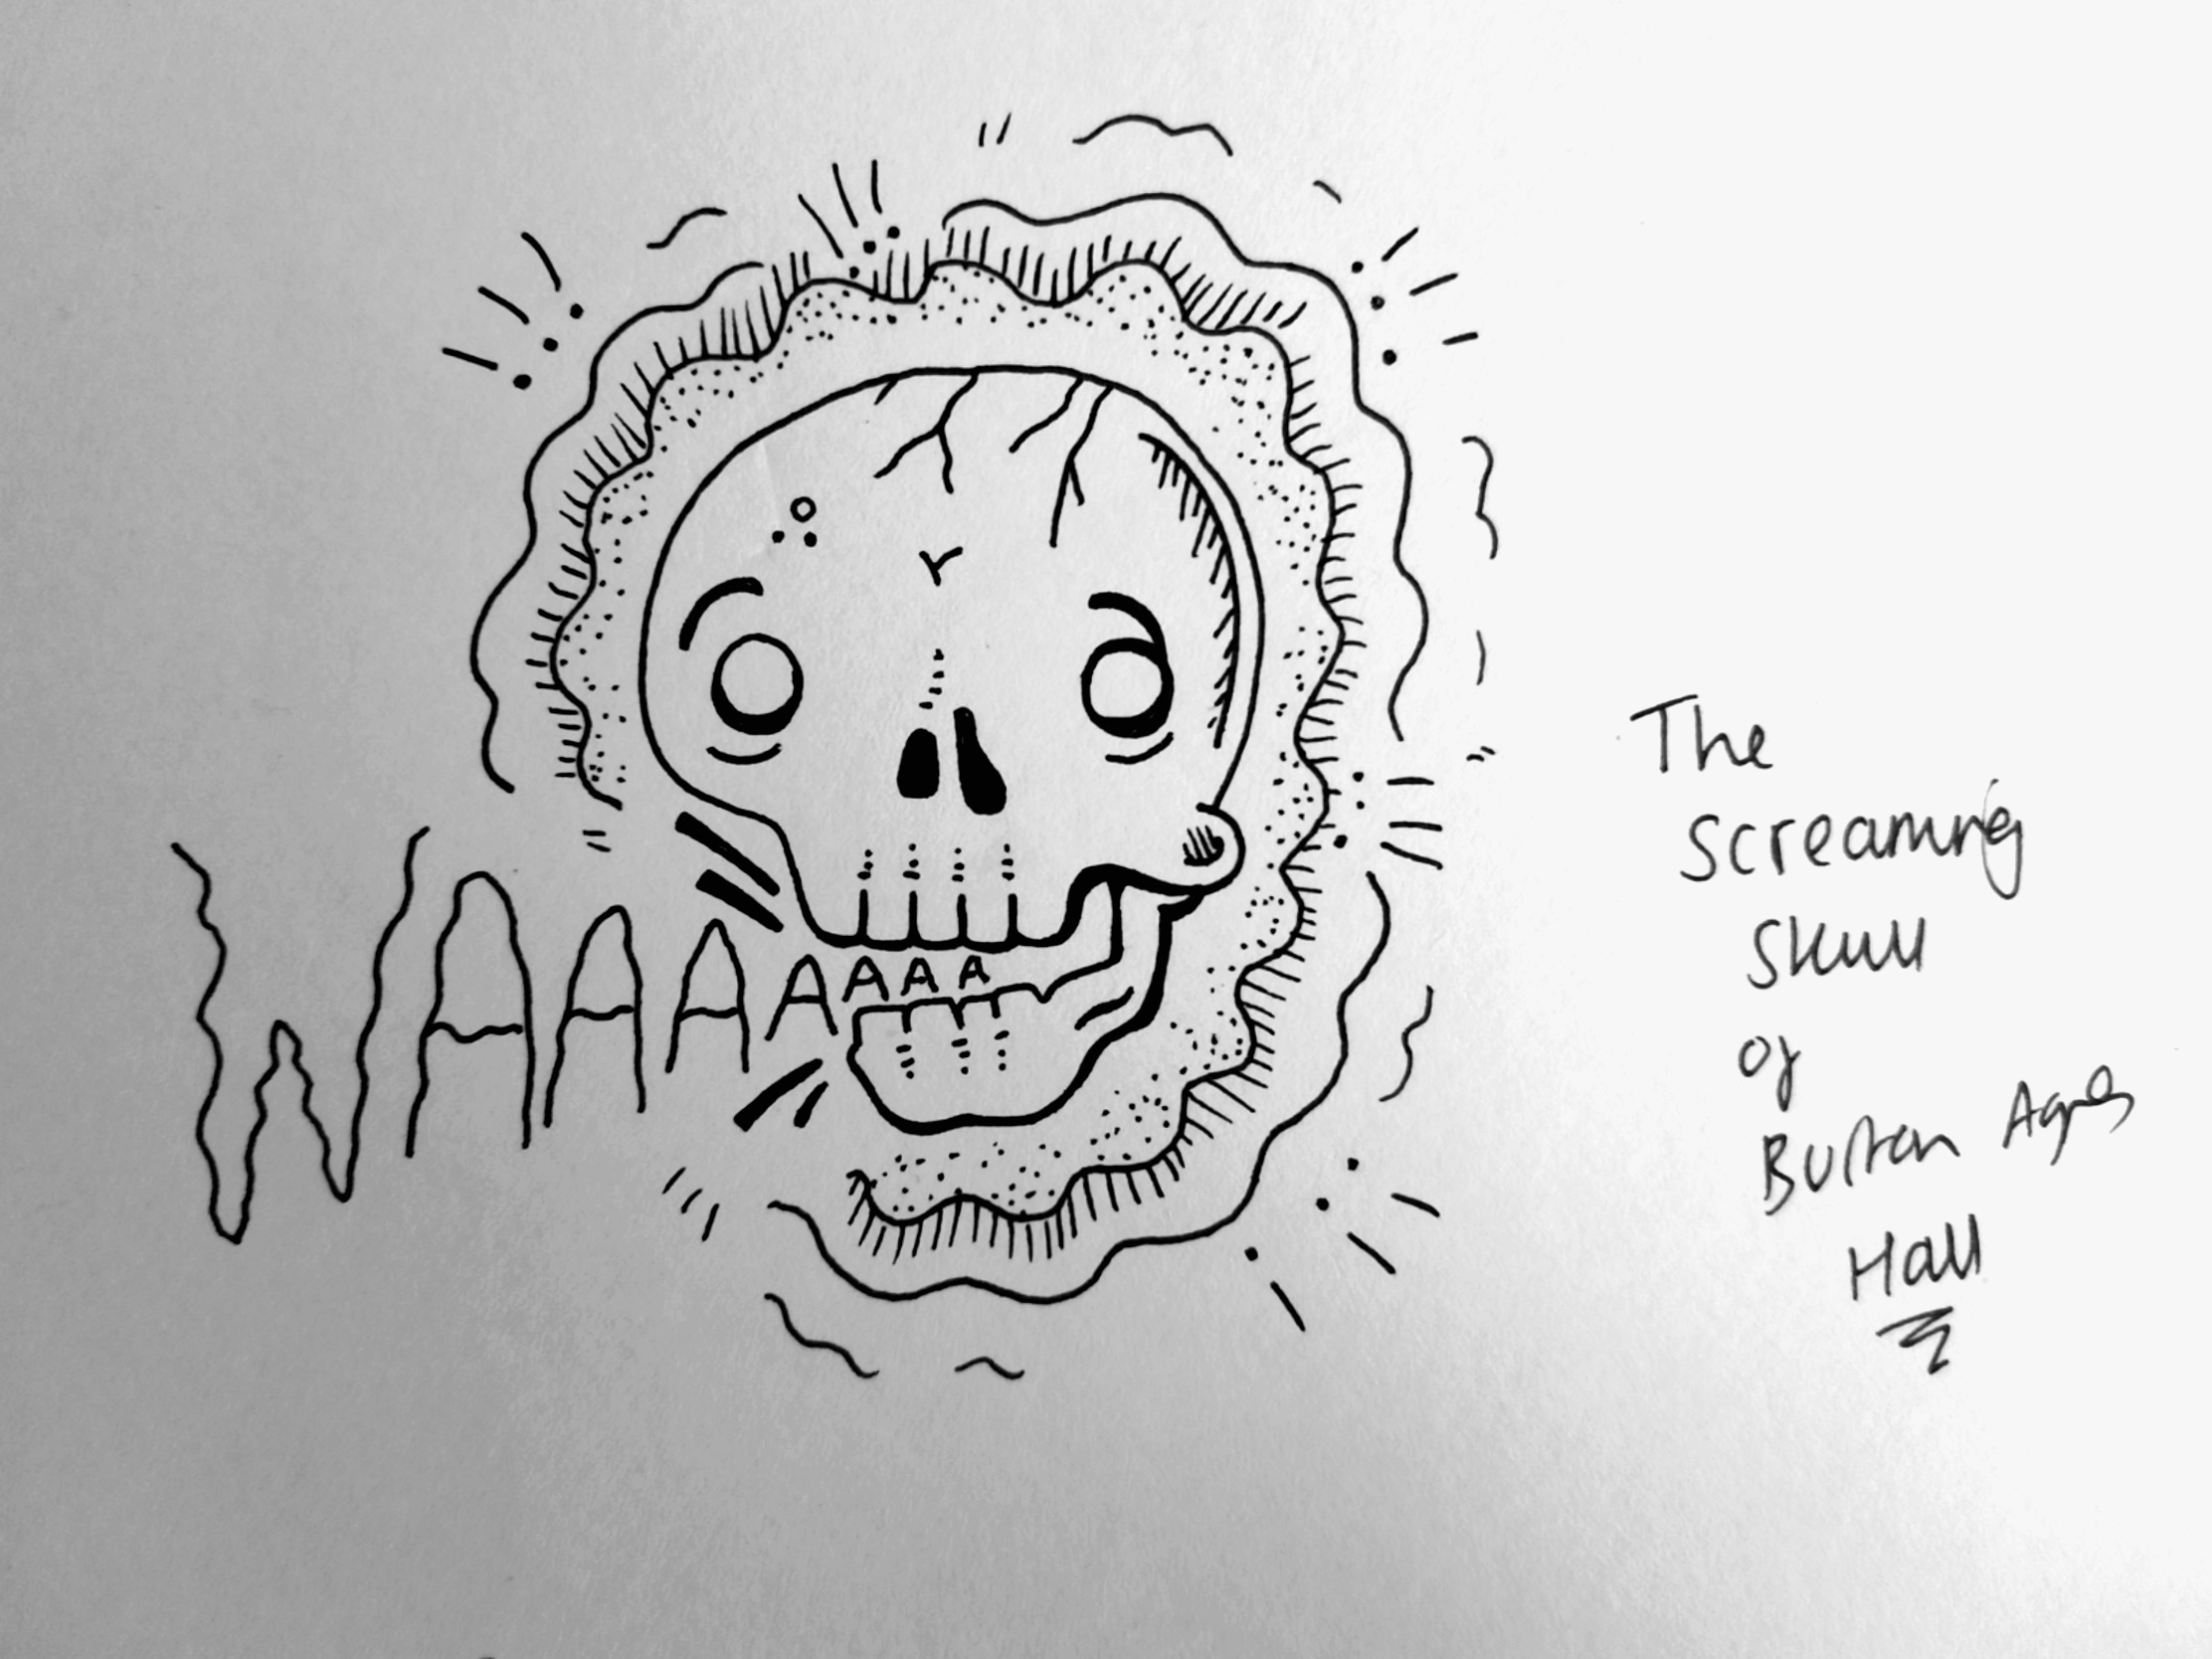 Illustrated Ghost Stories 2. The Screaming Skull of Burton Agnes Hall